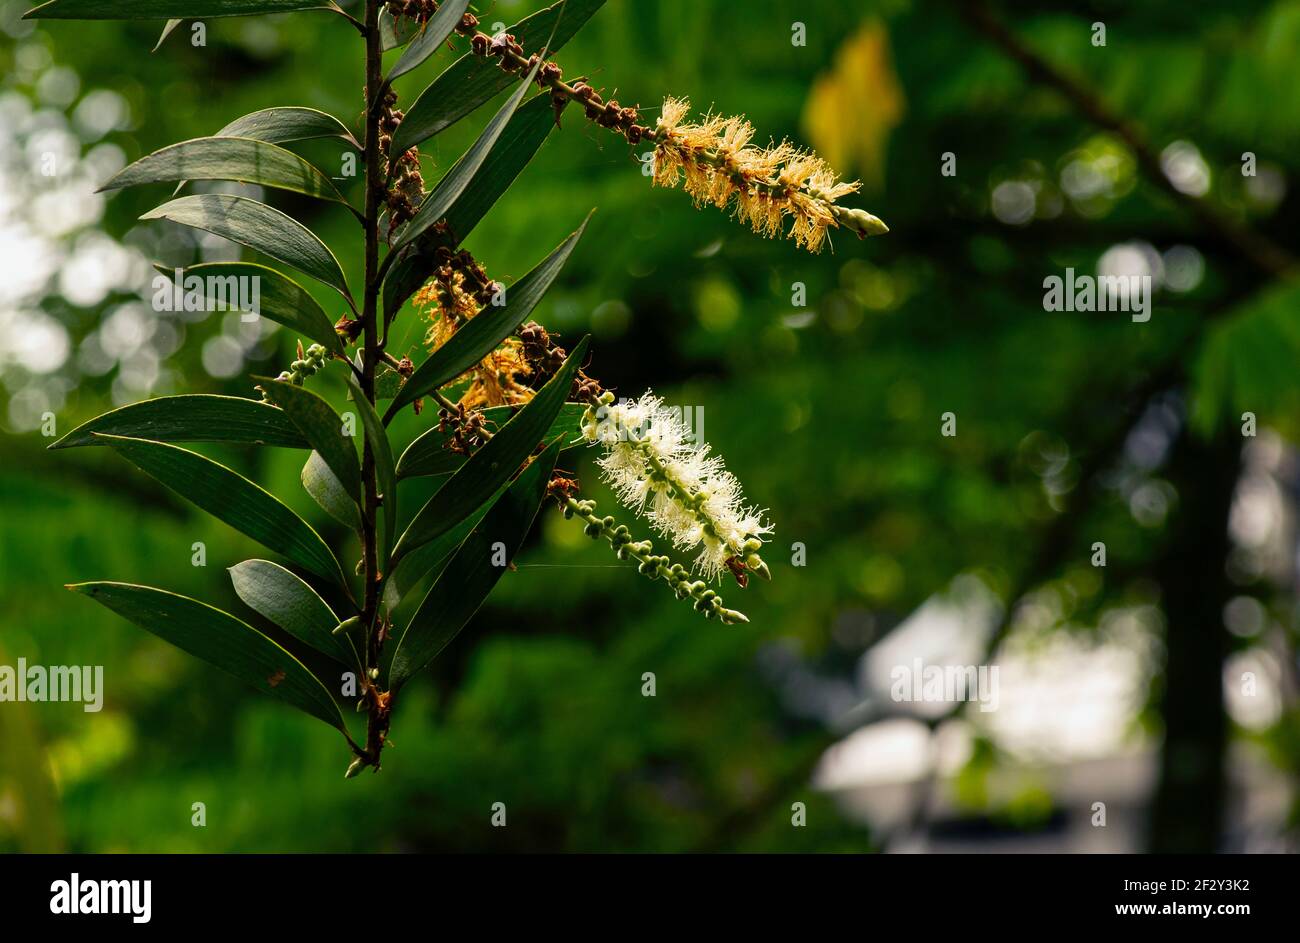 Melaleuca cajuputi flowers and leaves, in shallow focus. Cajuput oil is a volatile oil obtained by distillation from the leaves of cajuput trees Stock Photo